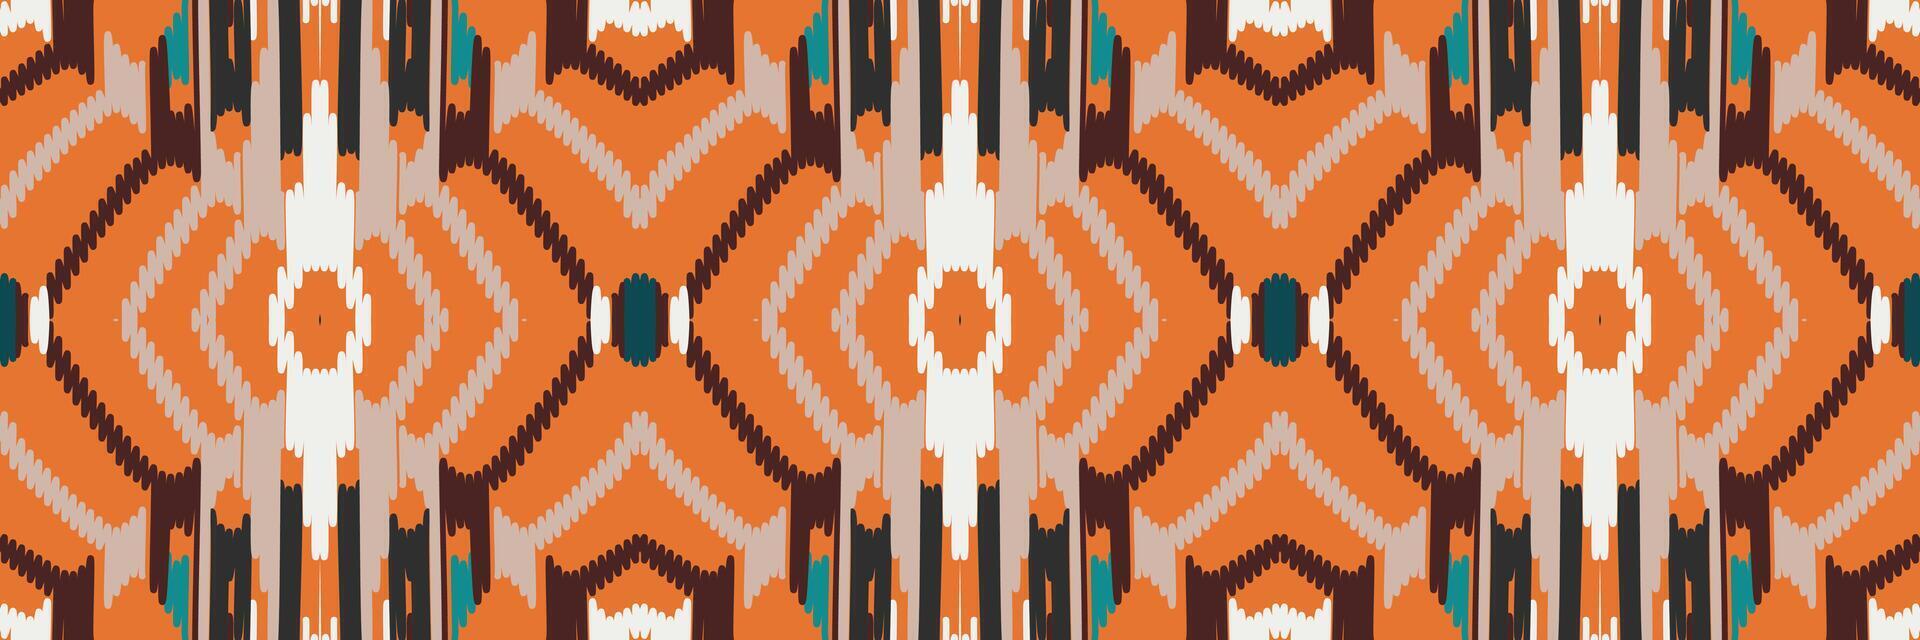 Abstract ethnic pattern art. Ikat seamless pattern in tribal. Design for background, wallpaper, vector illustration, fabric, clothing, carpet, embroidery.